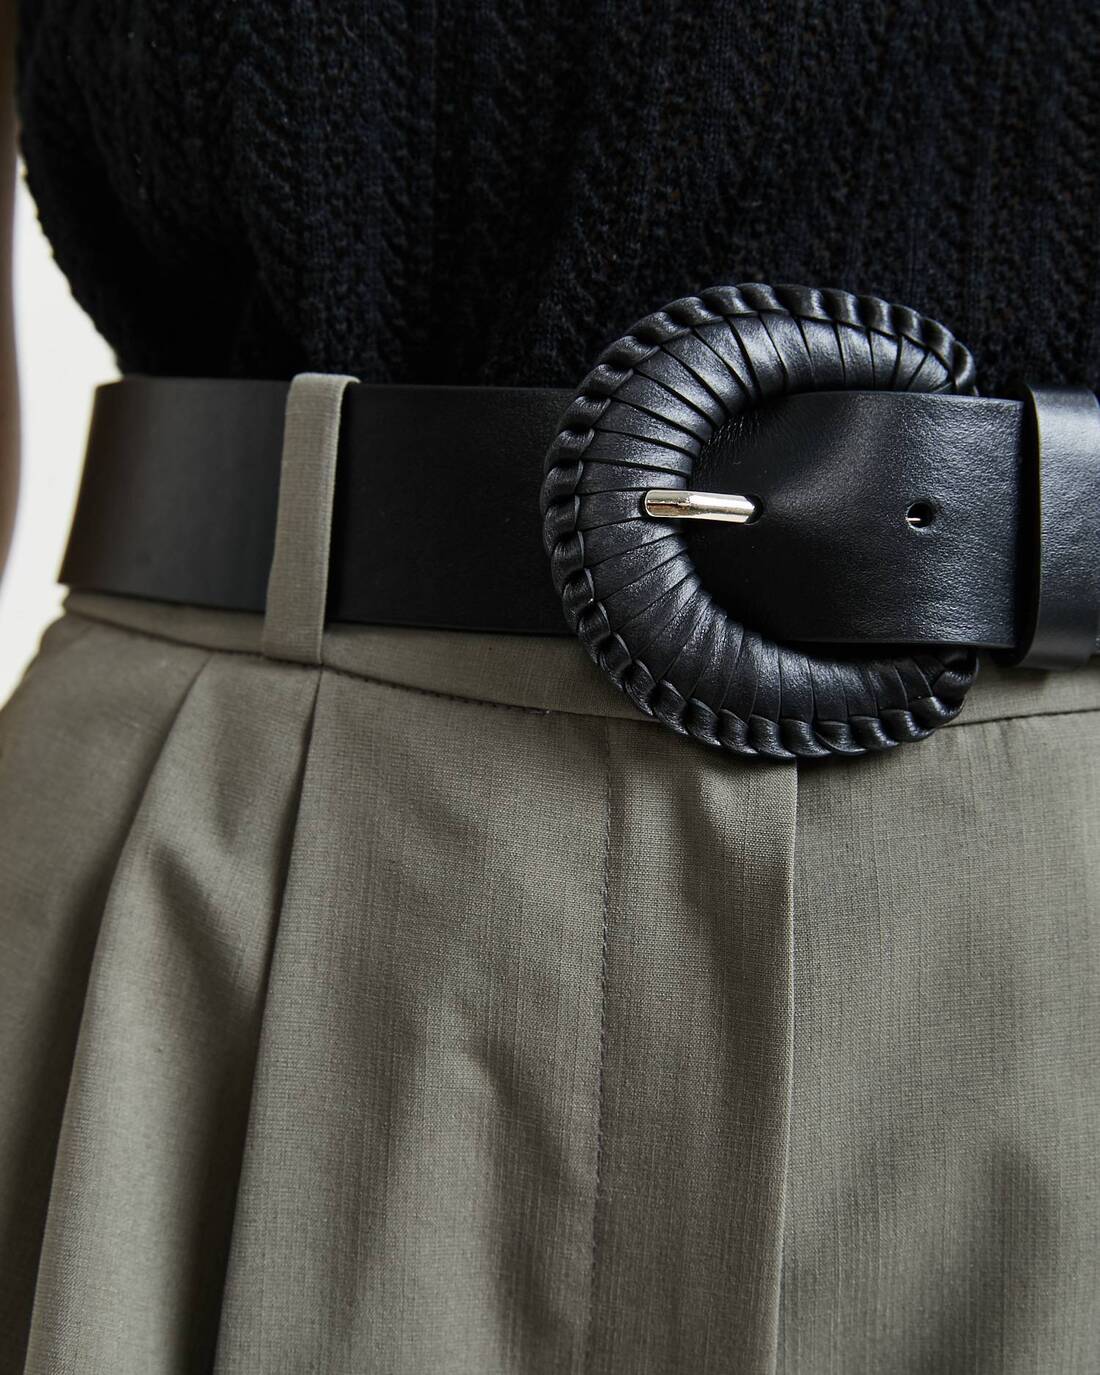 Thin leather belt with woven buckle